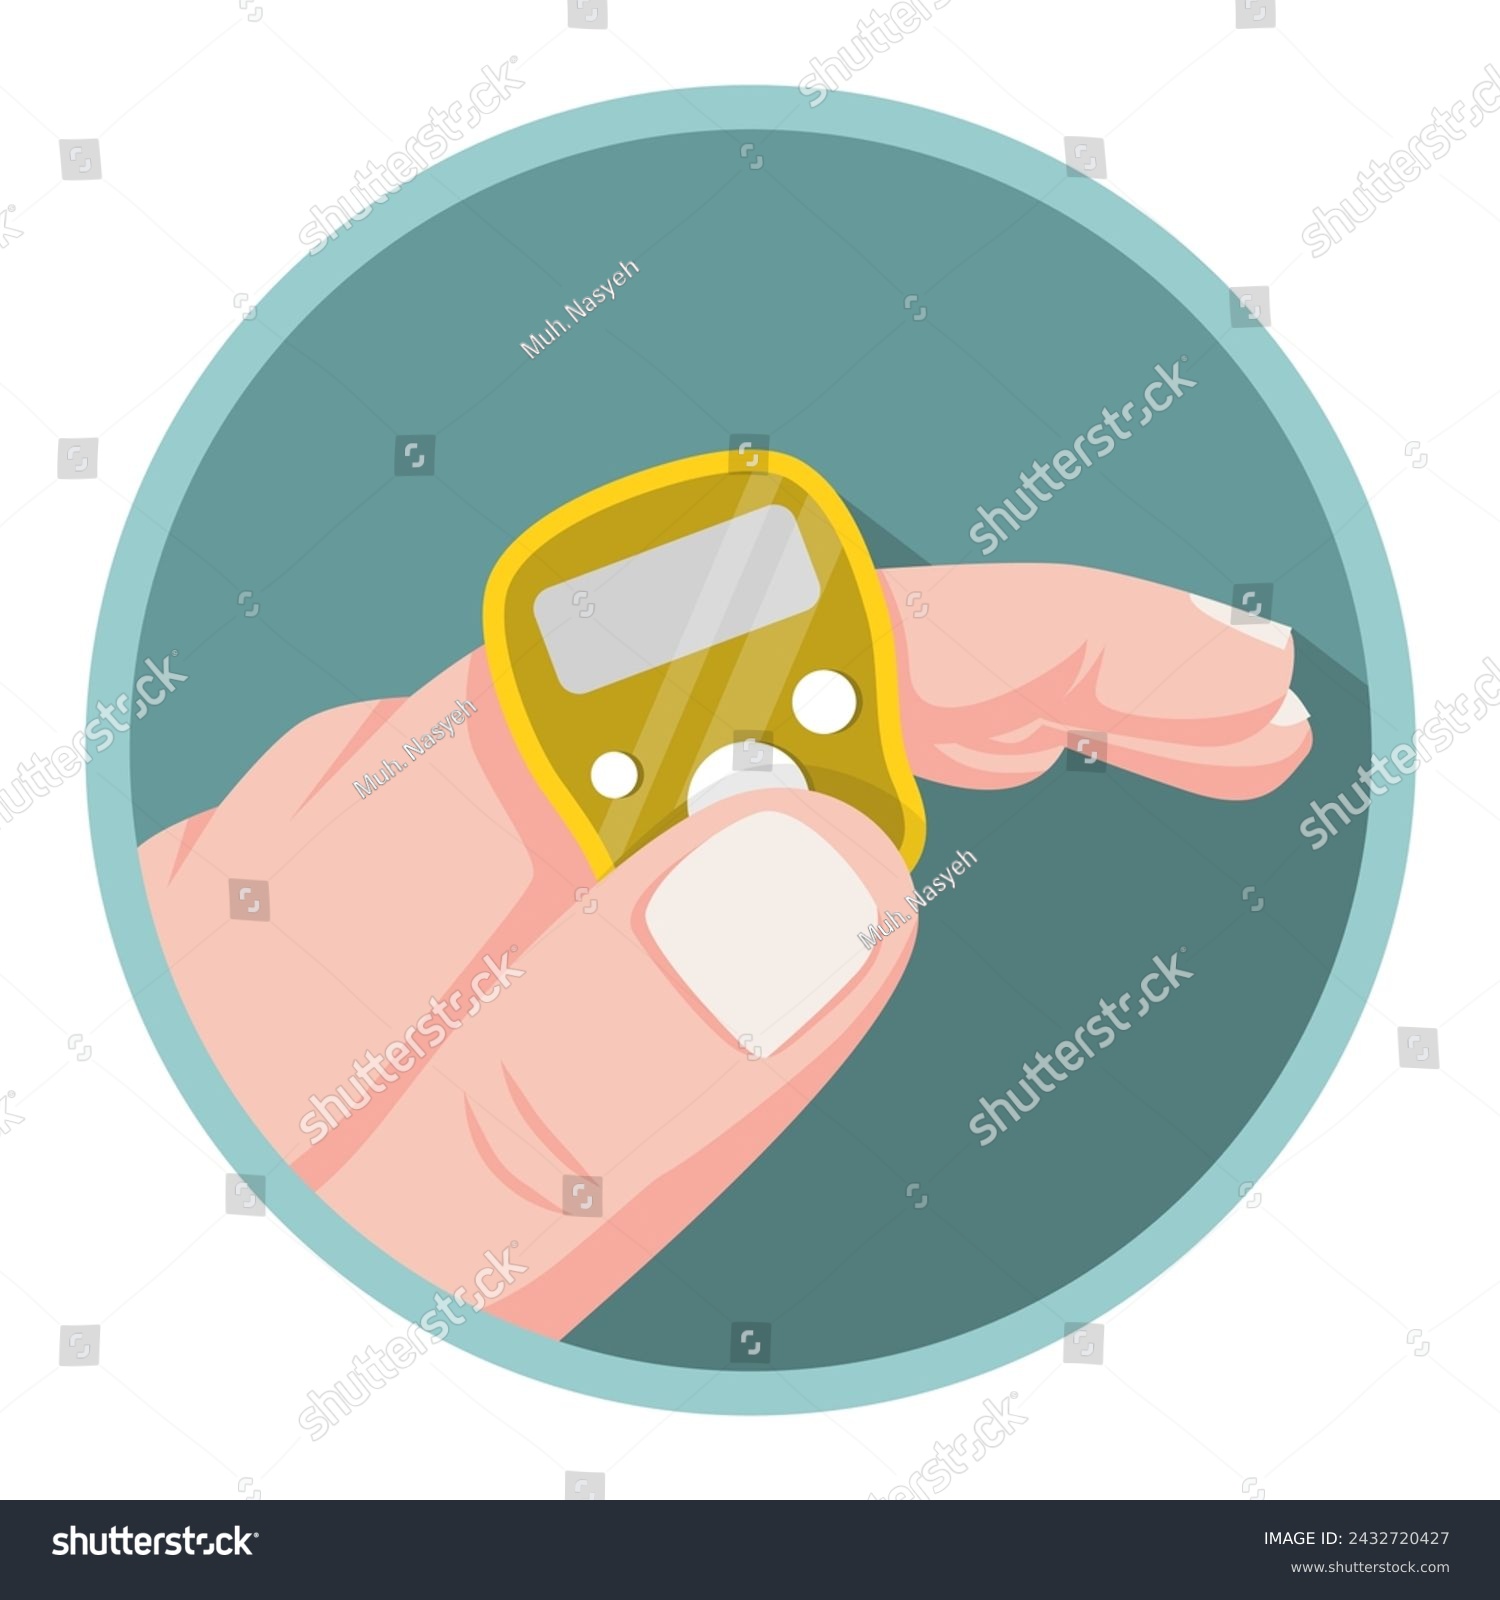 SVG of Islamic Tasbih kit - Digital Electronic Tasbih Finger Tally Counter and Tasbeeh Prayer Beads with hand illustration -  flat vector design. Use tally counter calculating your customers calculation. svg